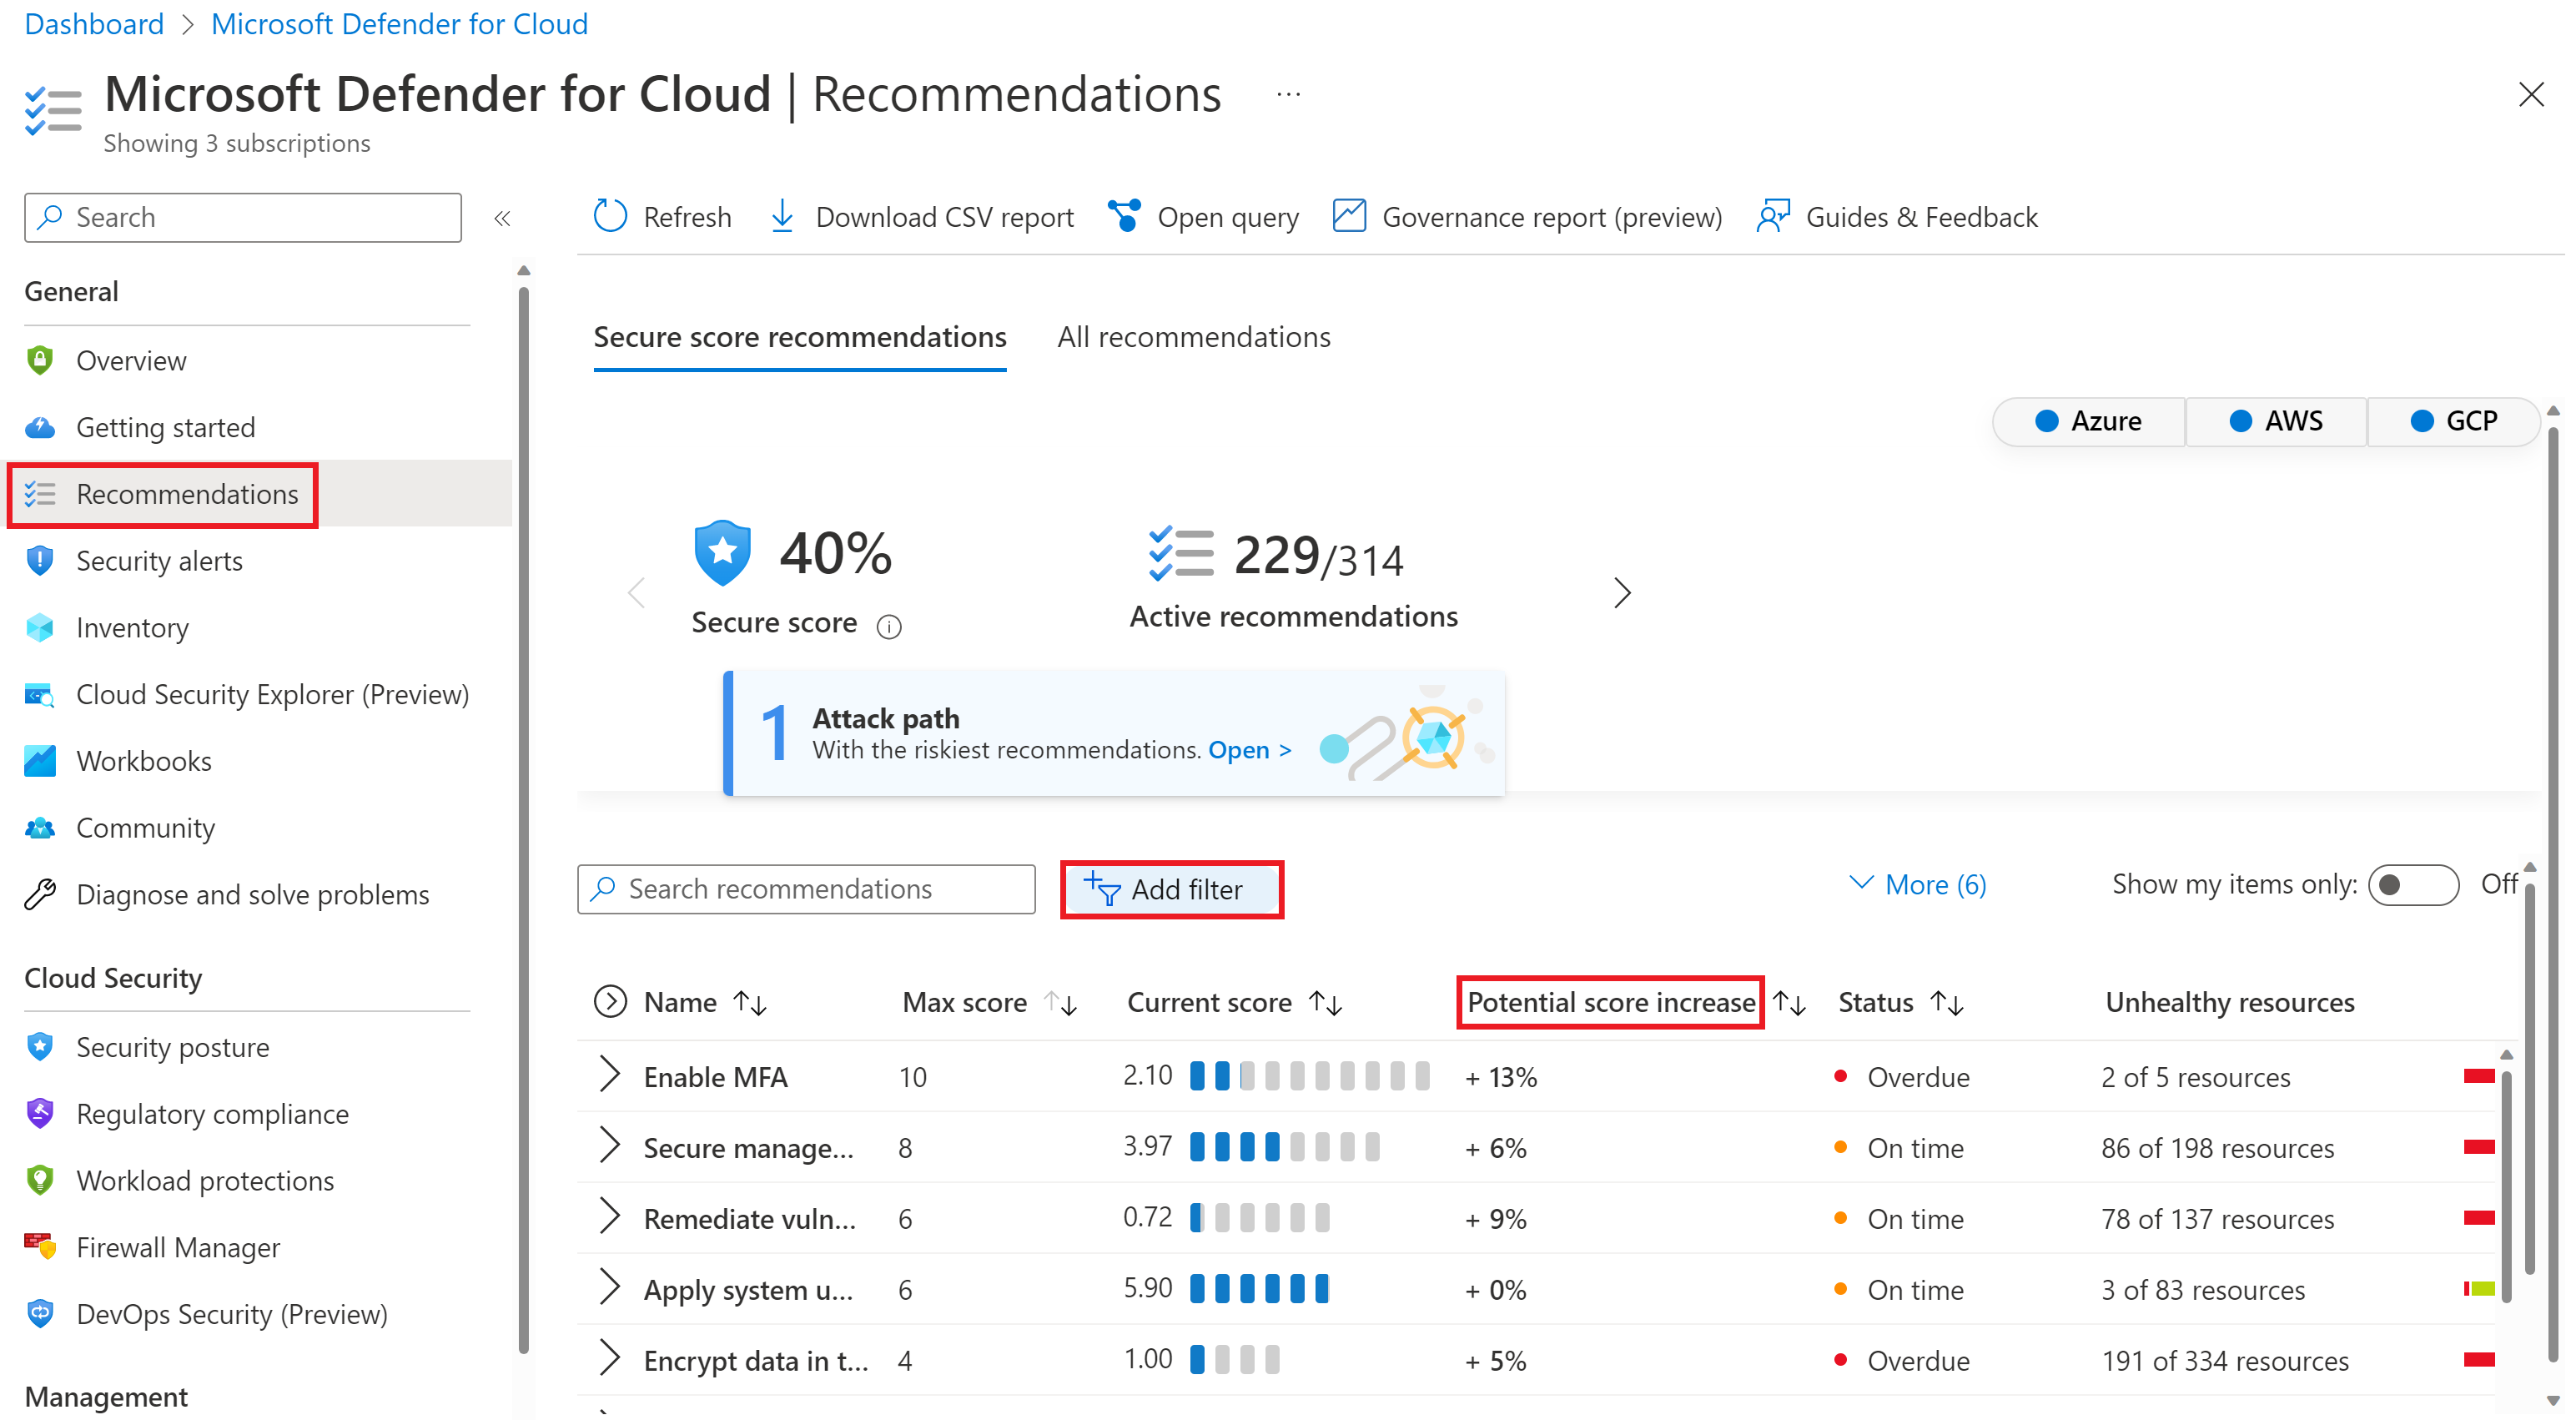 Screenshot example of Microsoft Defender for Cloud recommendations.